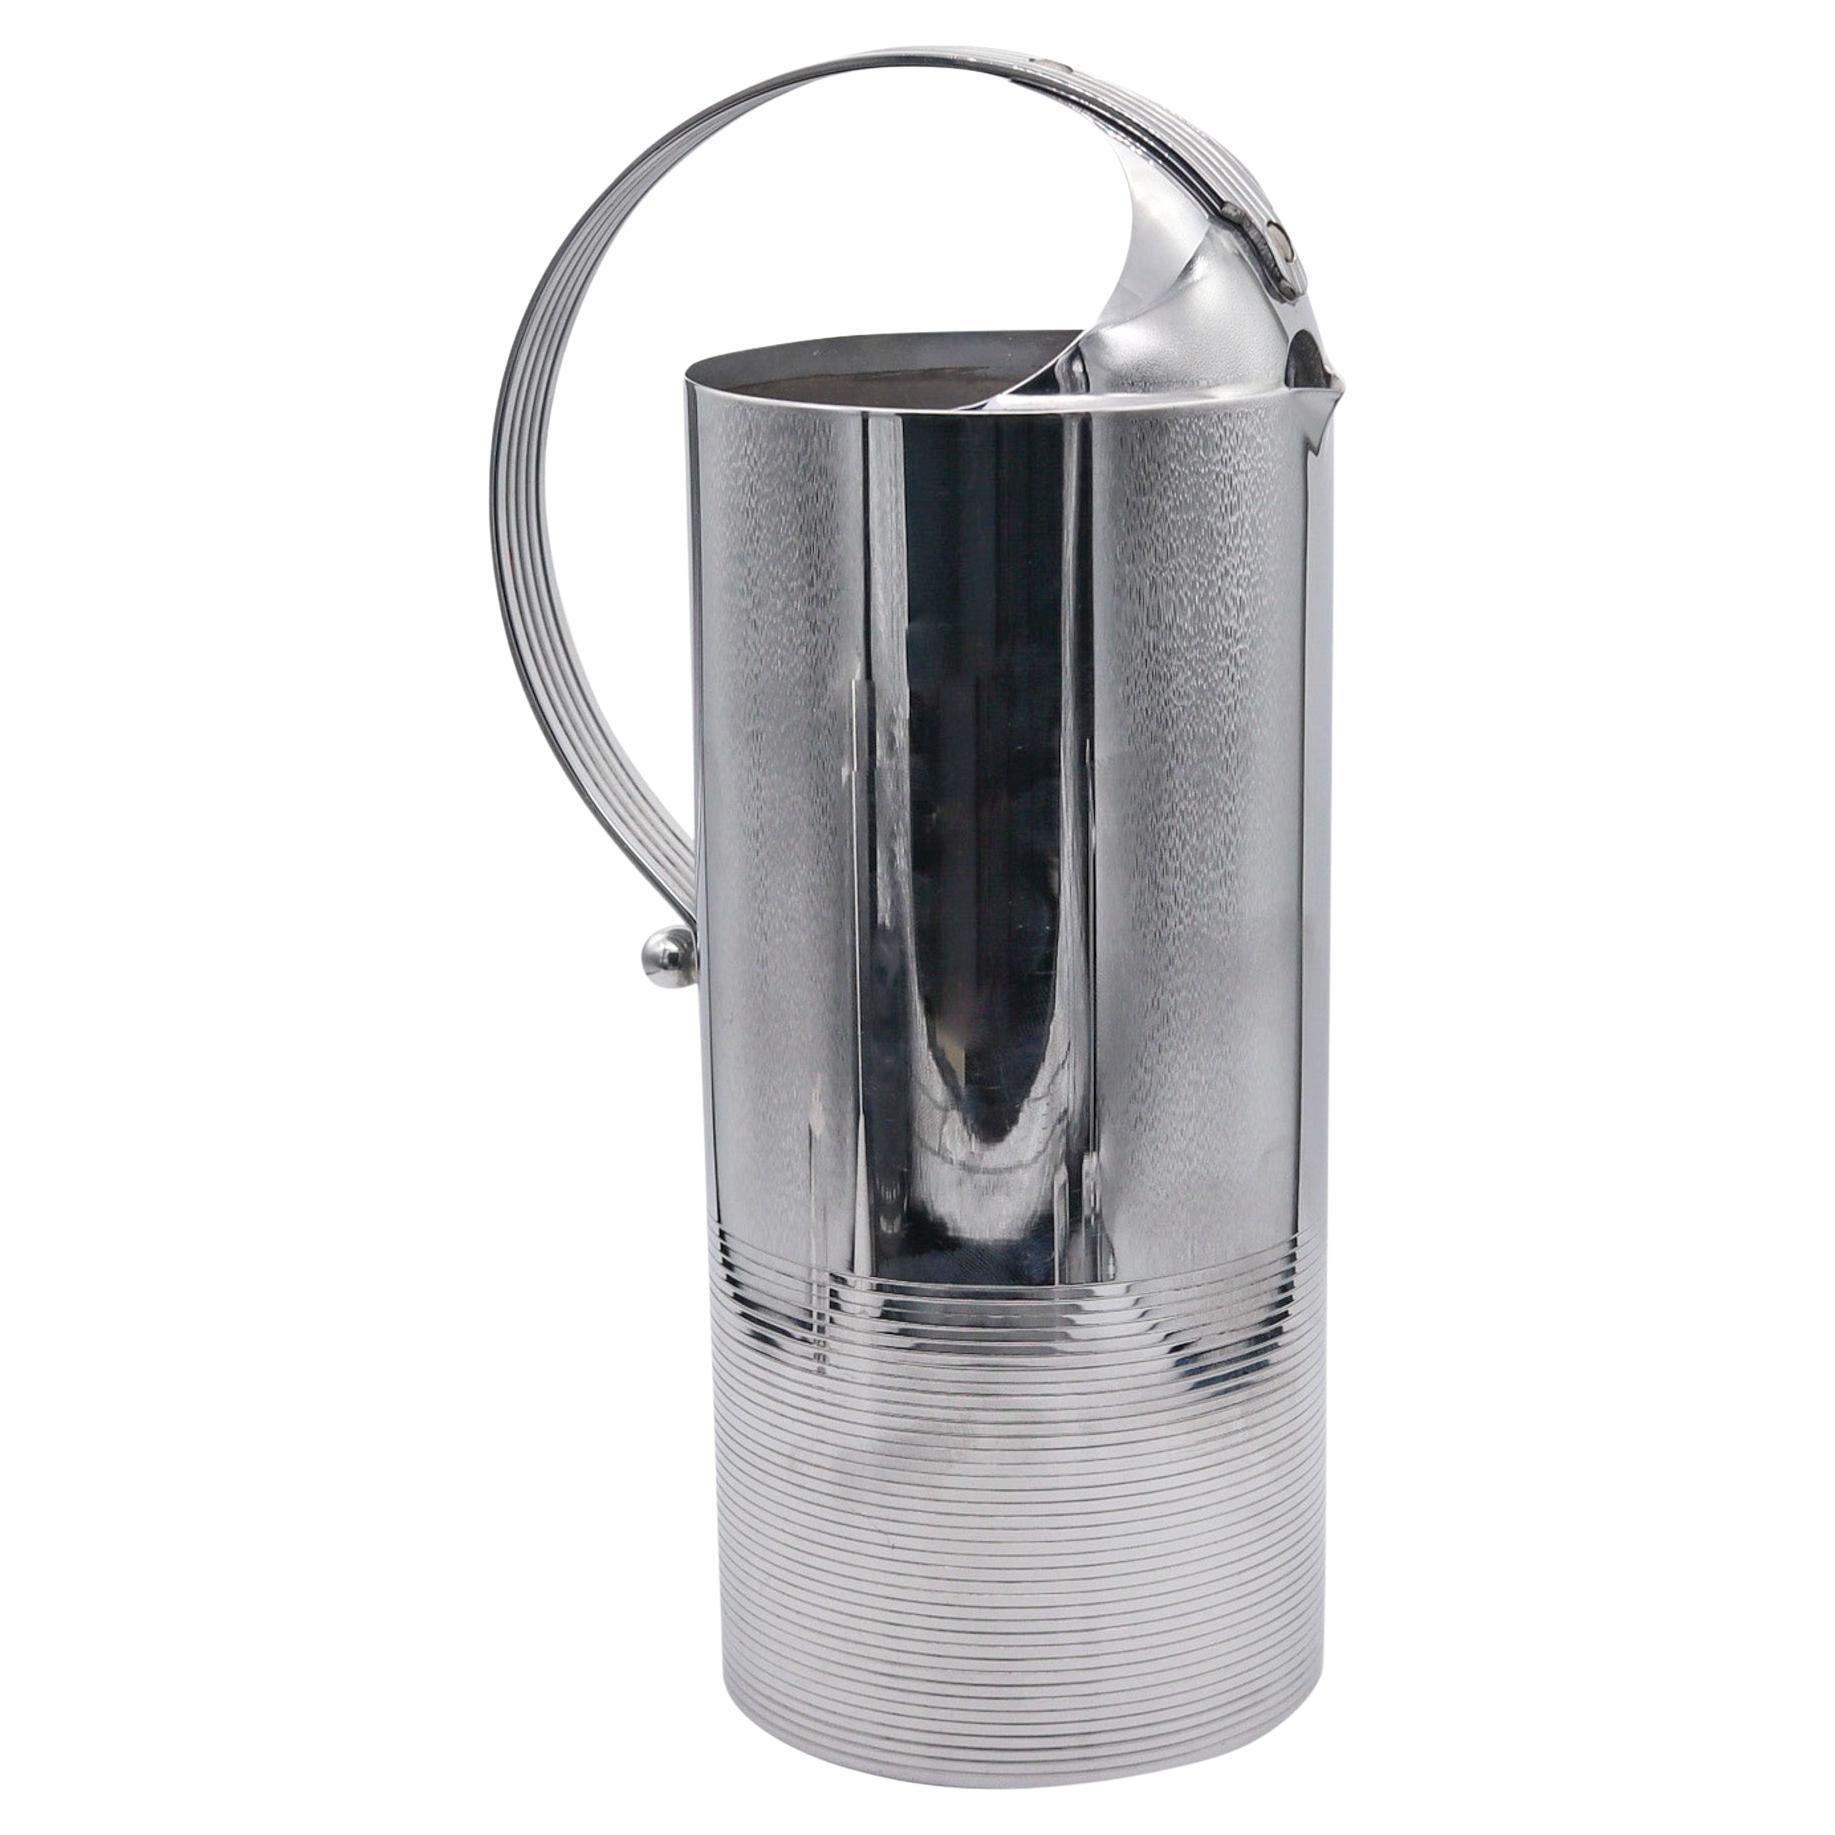 Manning Bowman 1930 By Bel Geddes Art Deco Machine Age Pitcher In Chromed Steel For Sale